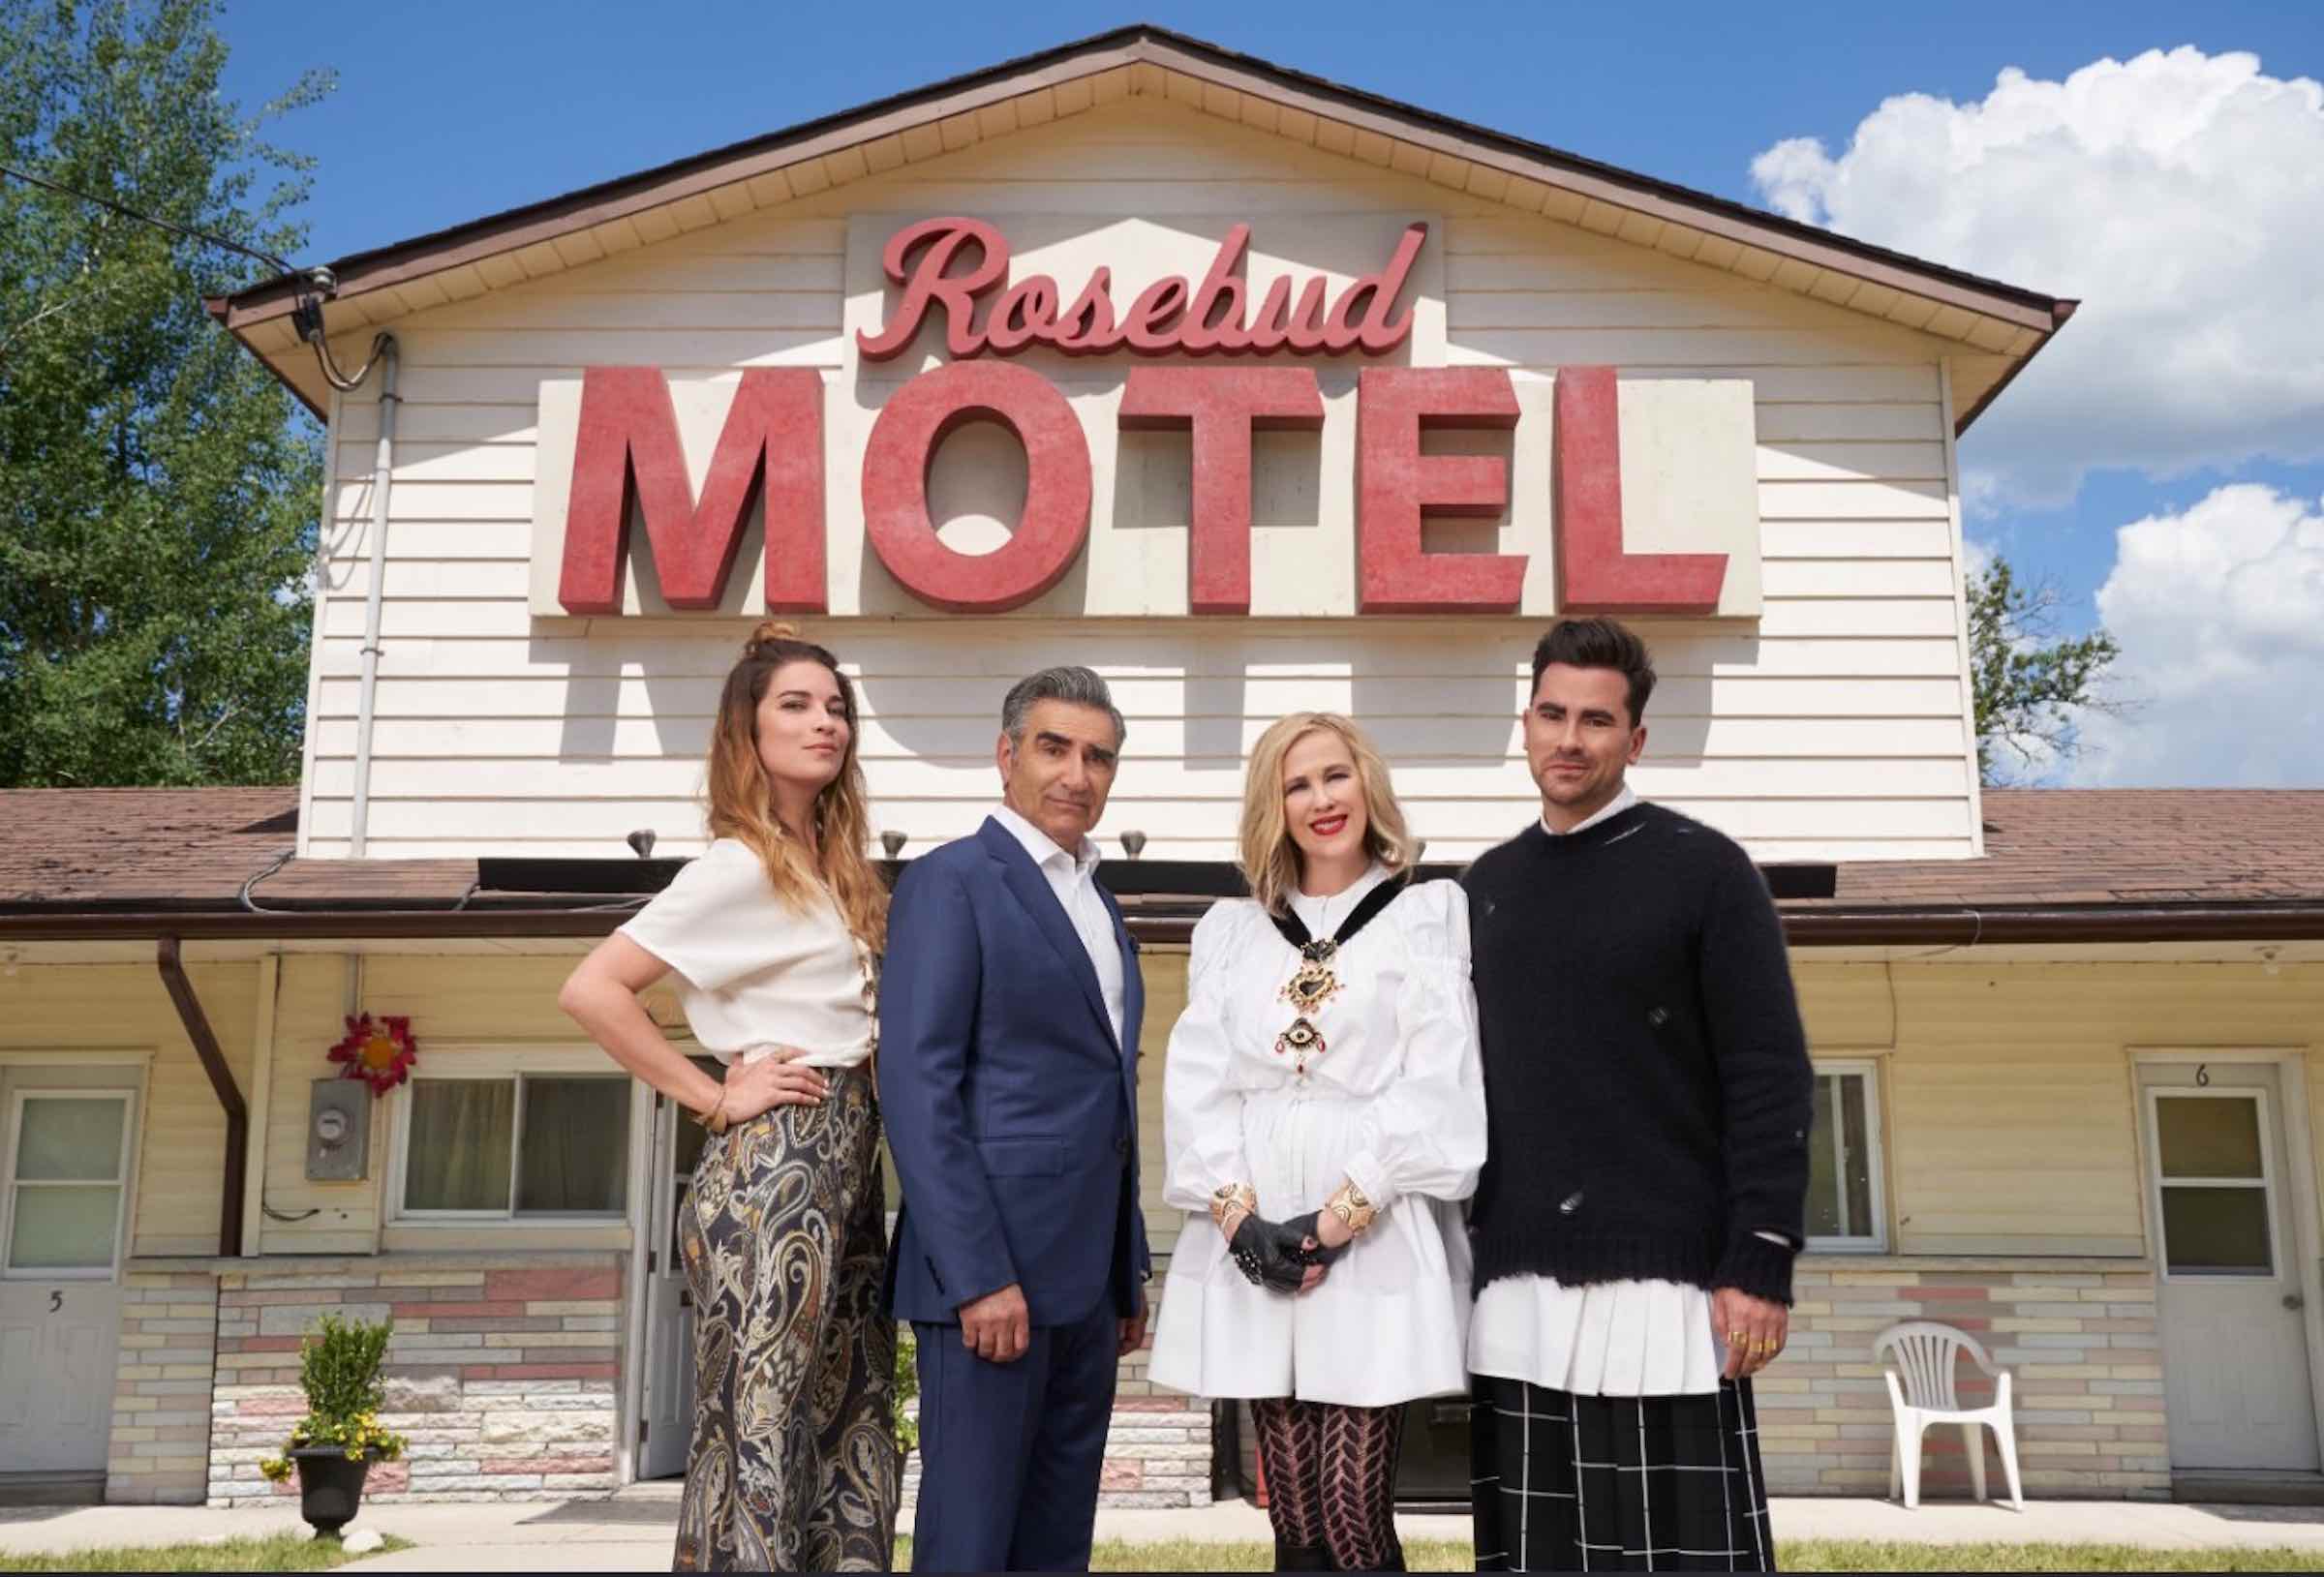 We want to make sure you know what has happened so far on the incredible 'Schitt's Creek' as it readies itself for its final bows.